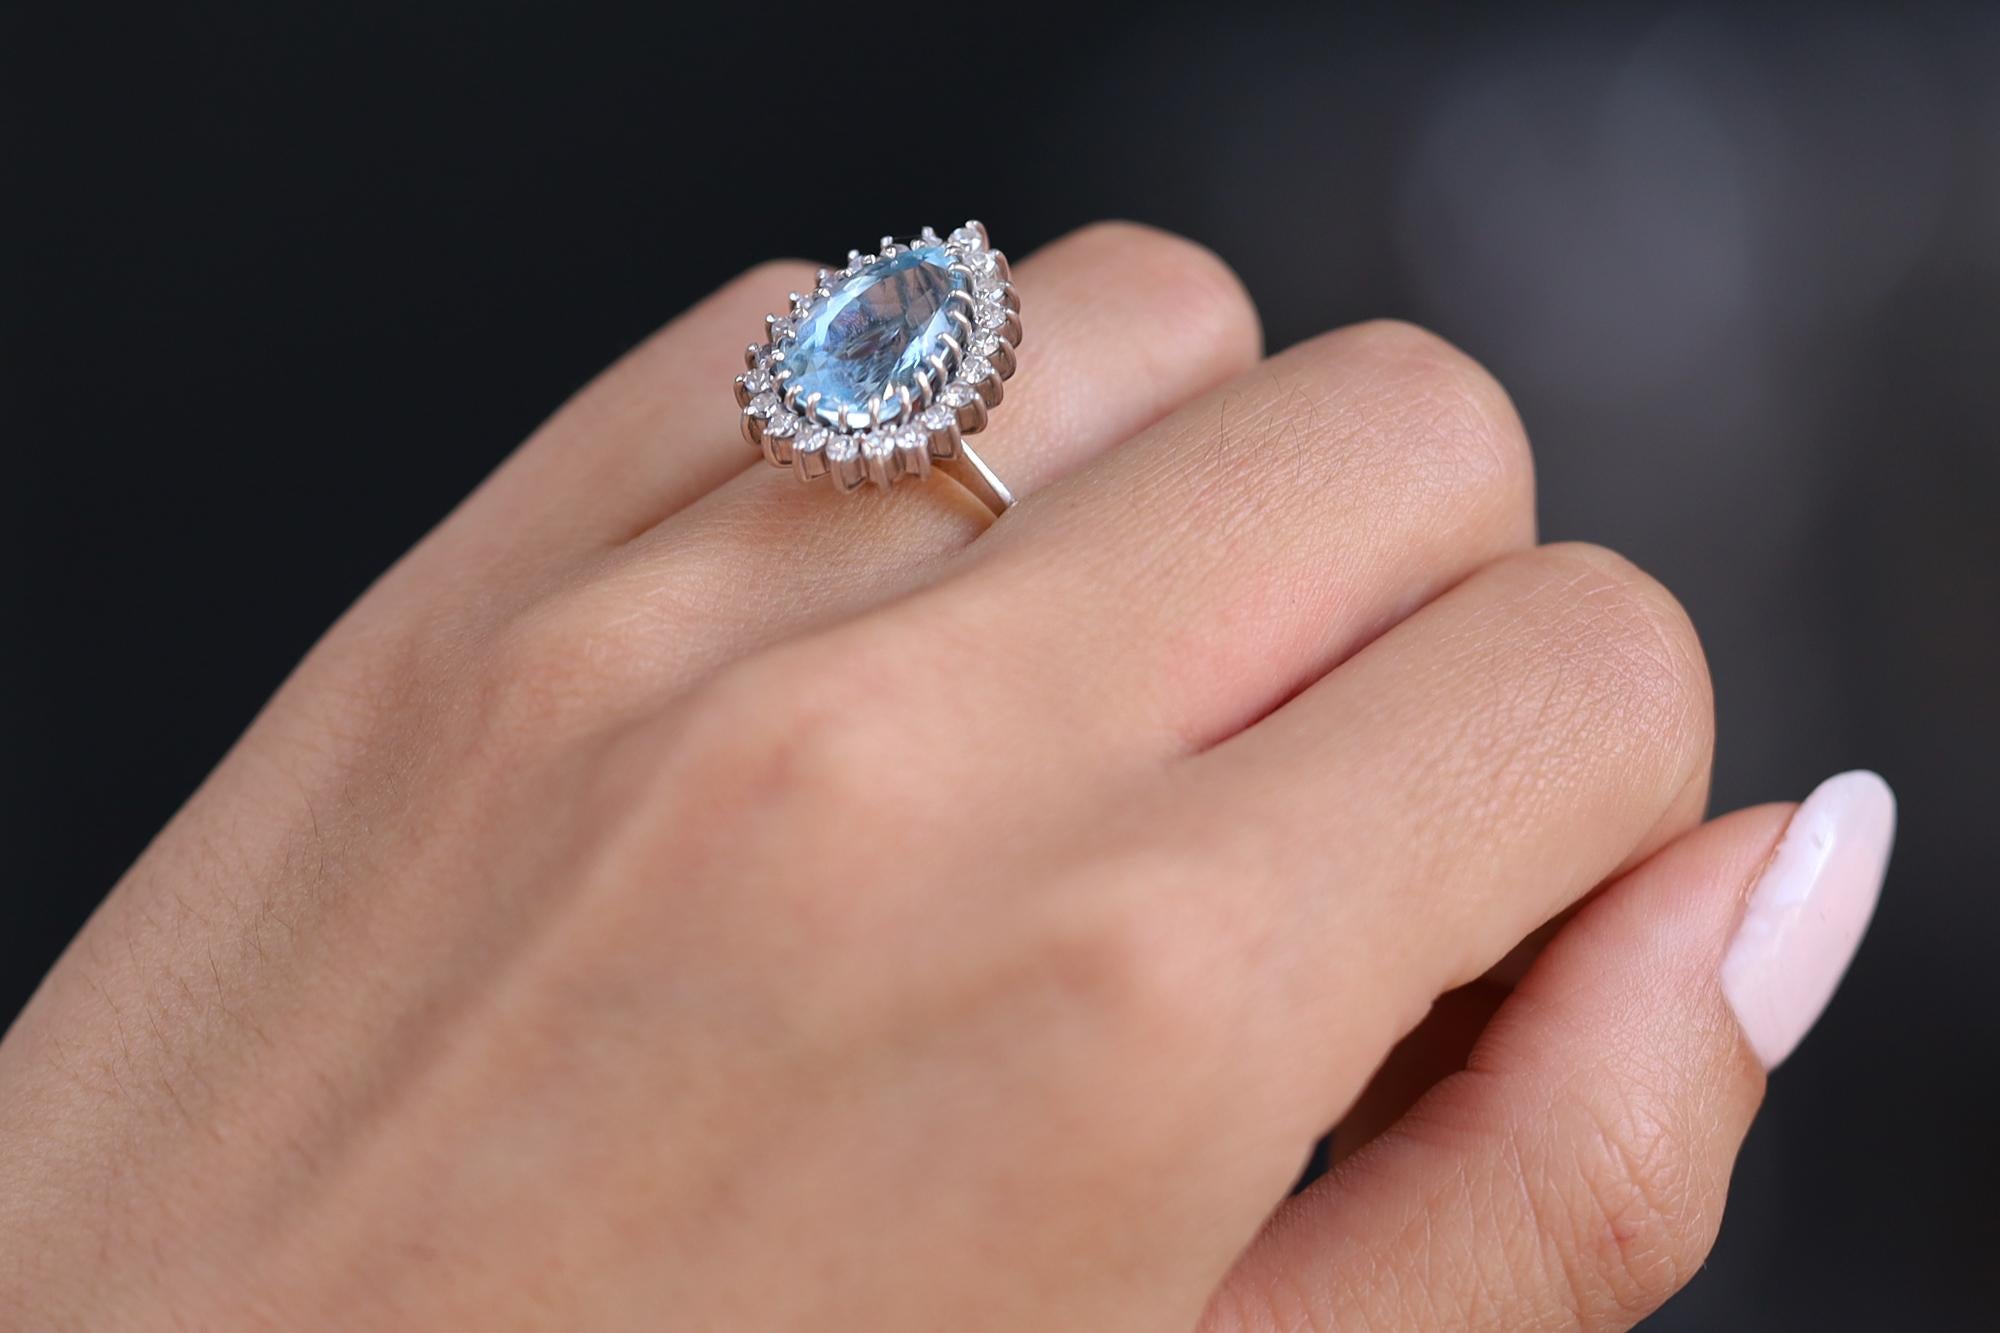 Expertly handcrafted with 18 karat white gold, this vintage estate cocktail ring features a stunning 4.25 carat vivid blue aquamarine gem from the famed Santa Maria, Brazil mine, cut into the popular pear shape. A versatile treasure, worn as a right